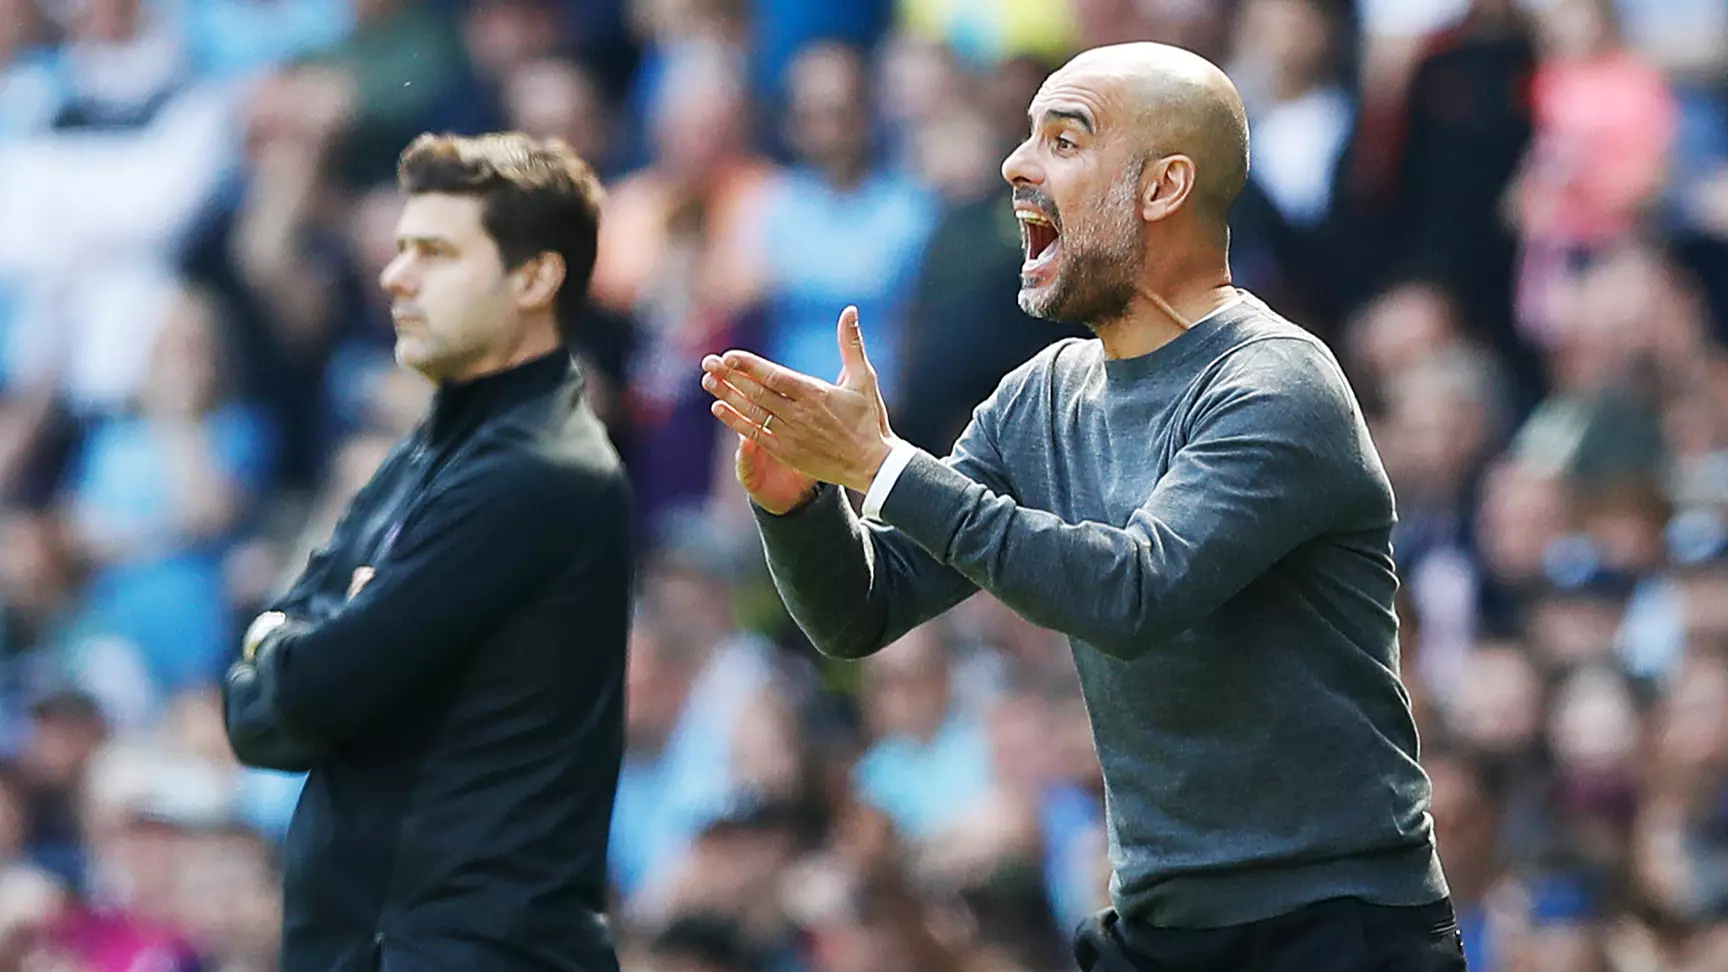 Man City vs Spurs: Live Stream And TV Channel For Premier League Clash At The Etihad